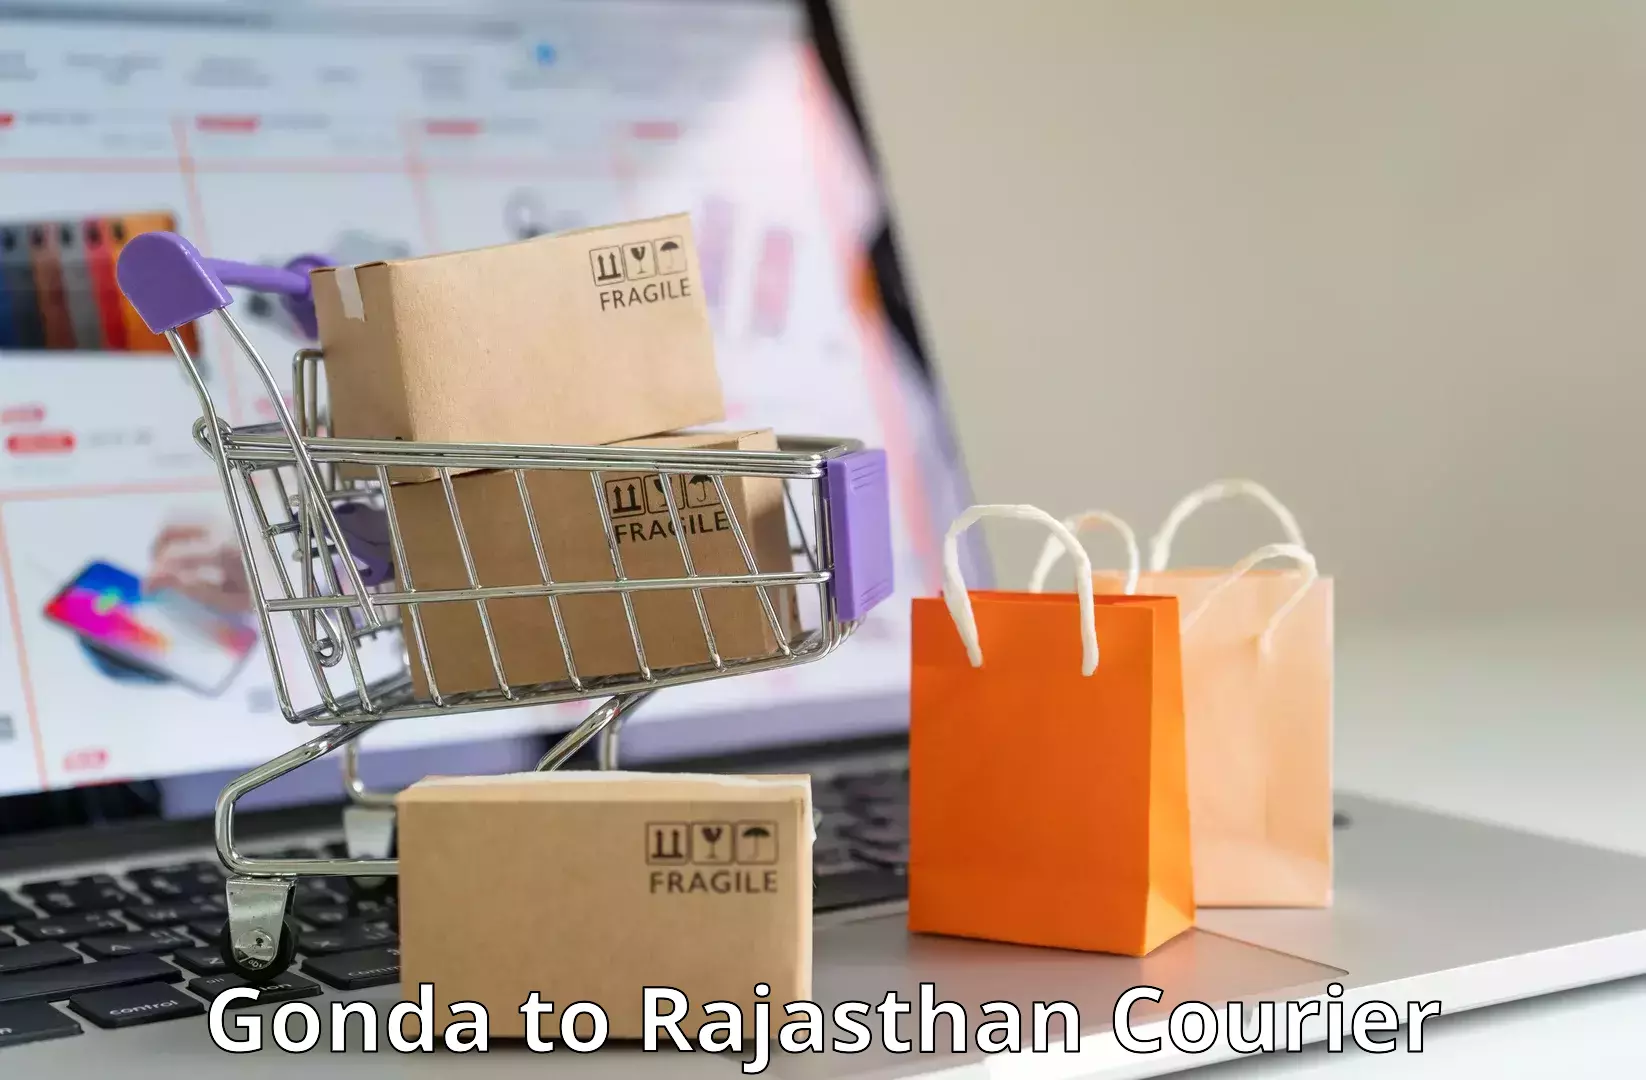 End-to-end delivery Gonda to Rajasthan